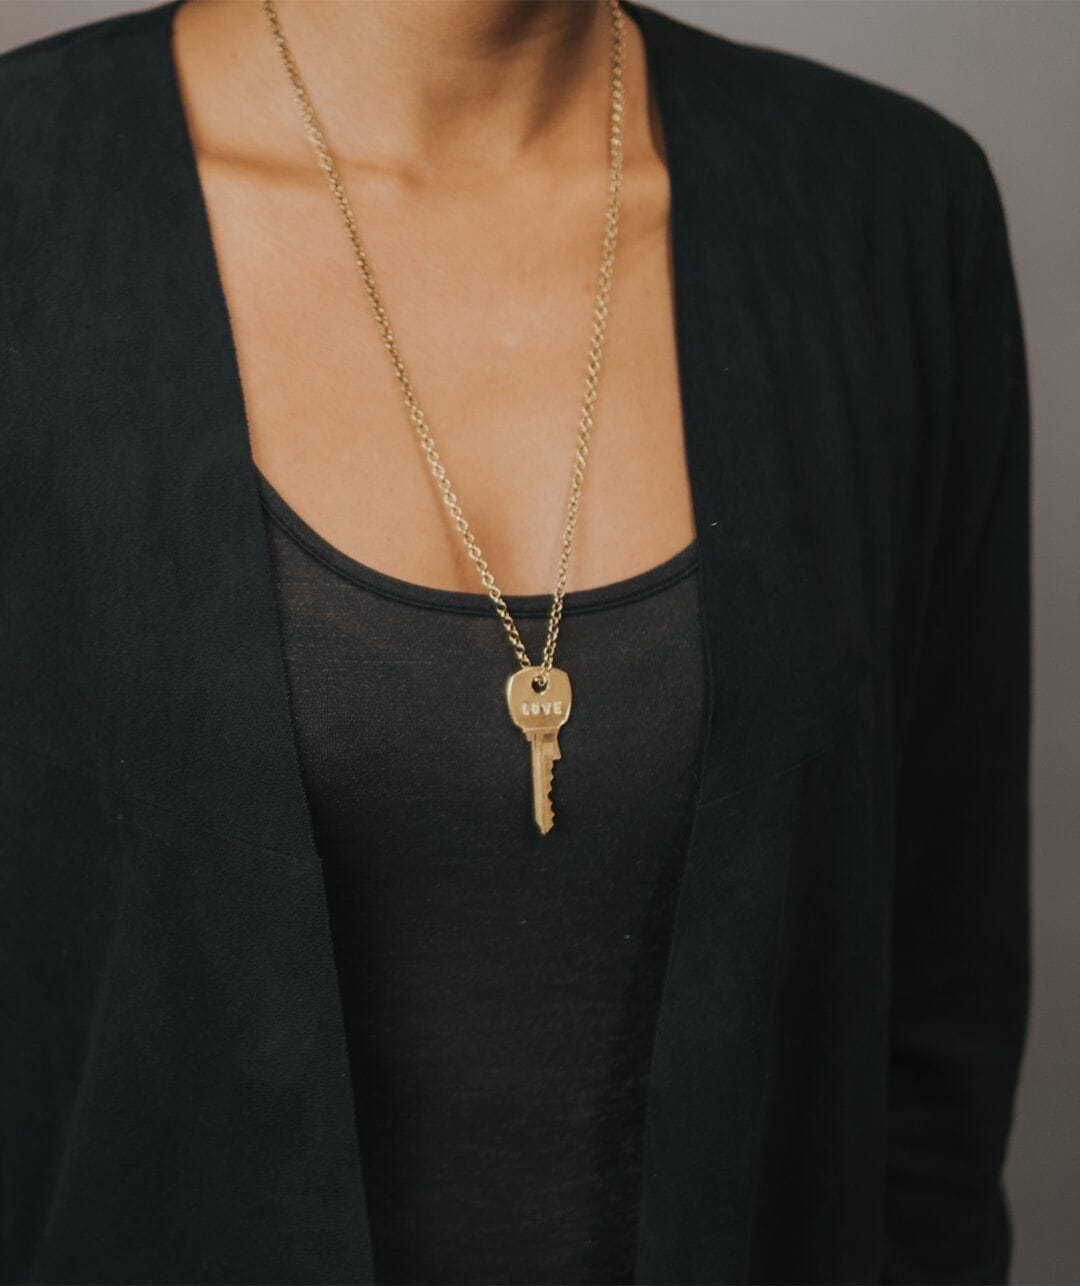 Classic Key Gold Rolo Chain Necklace Necklaces The Giving Keys 